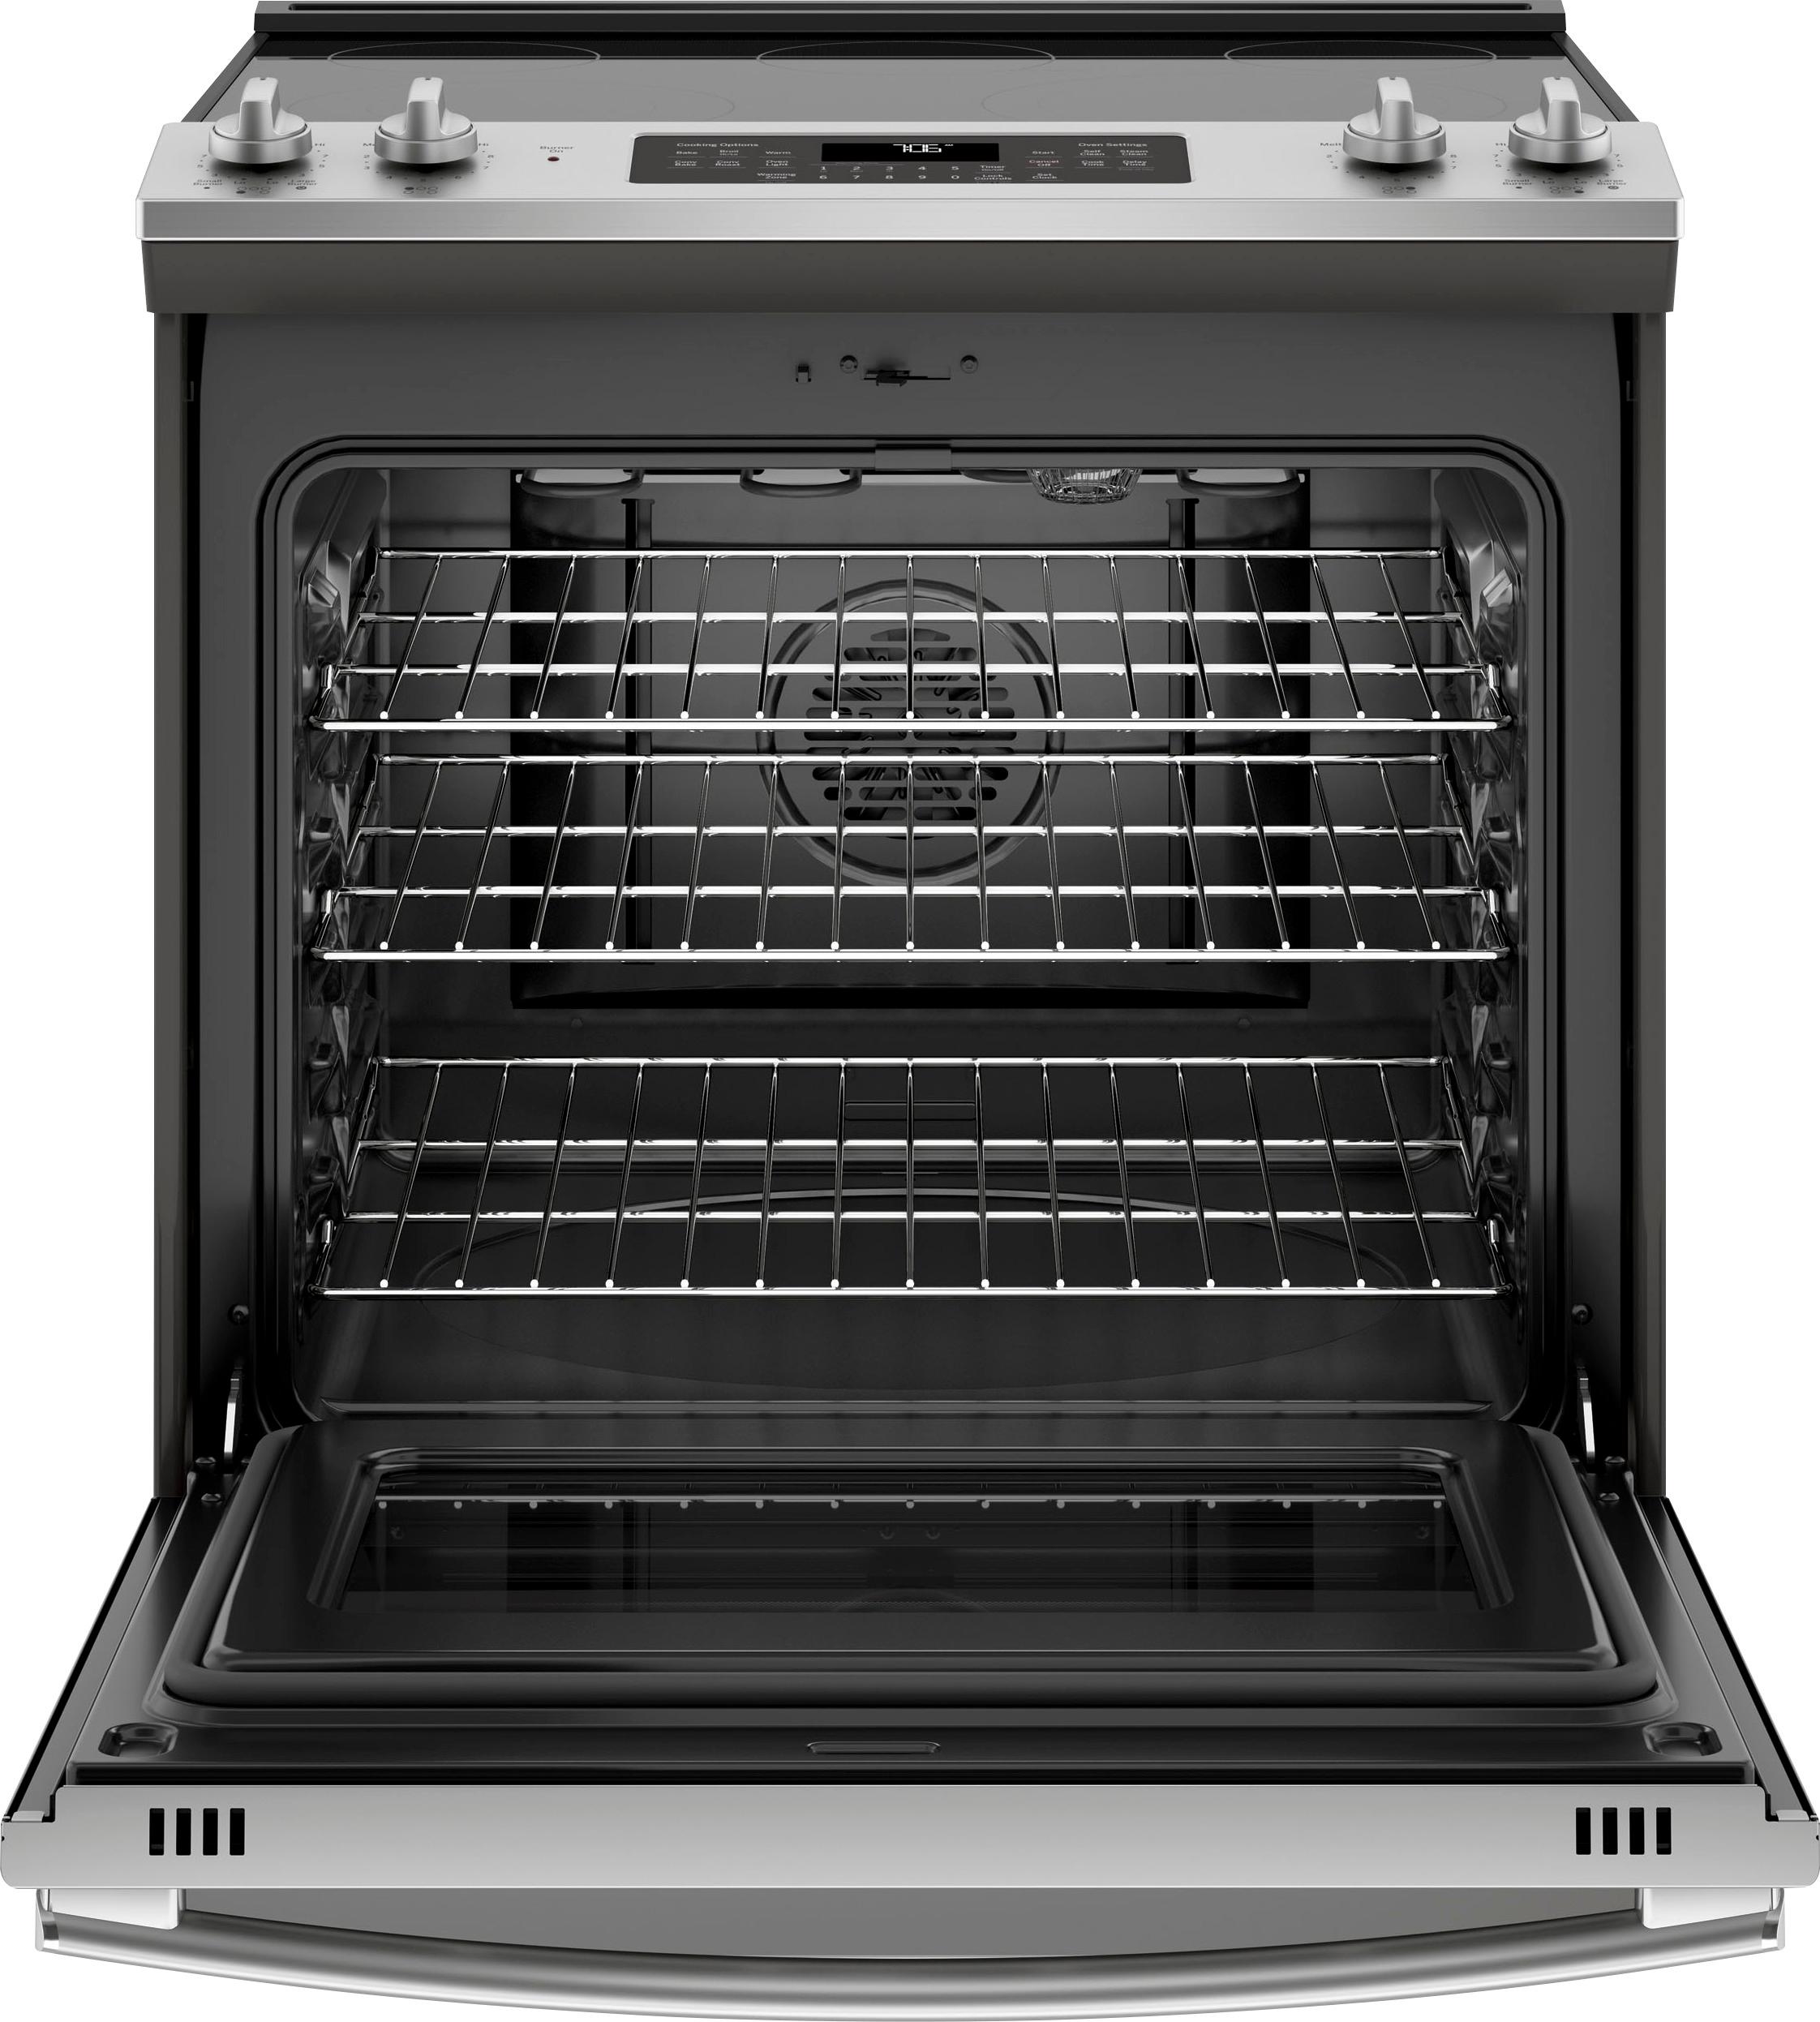 Angle View: GE Profile - 36" Built-In Electric Cooktop - Stainless steel on black